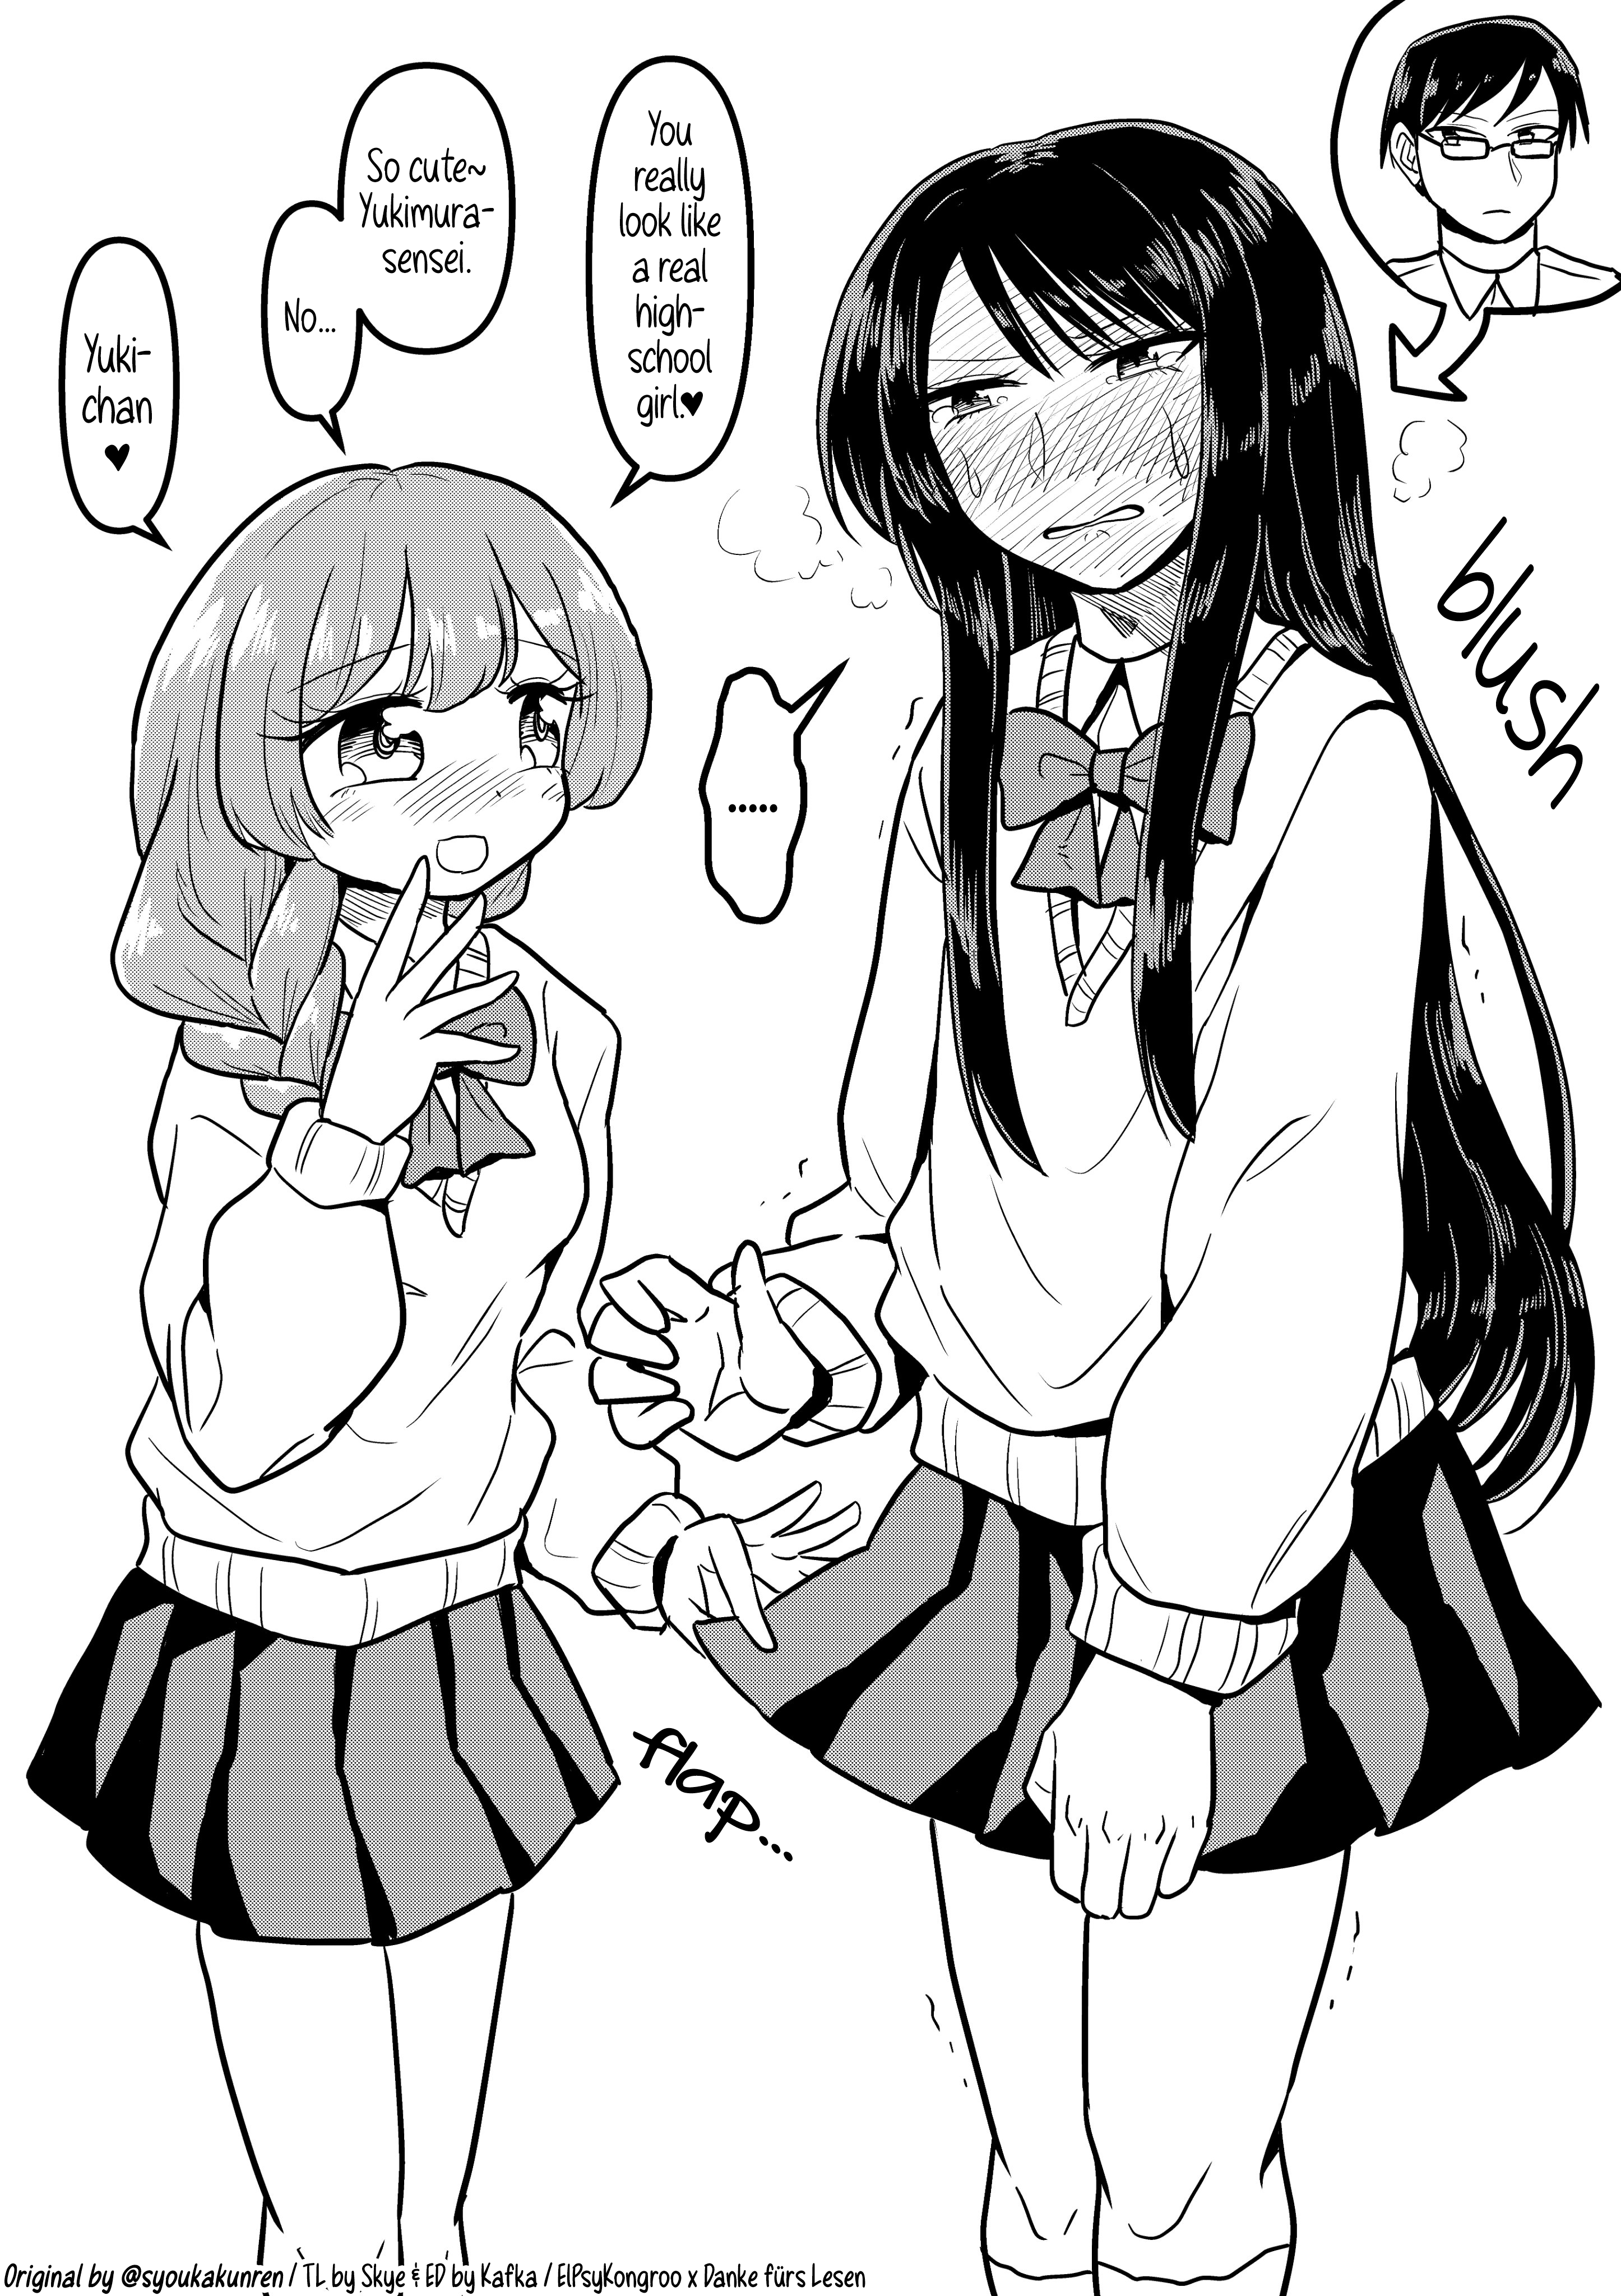 A Sensei Whose Hobby Was Found Out By A Student So He's Threatened By Her To Get Dolled Up And Crossdress At School. manga